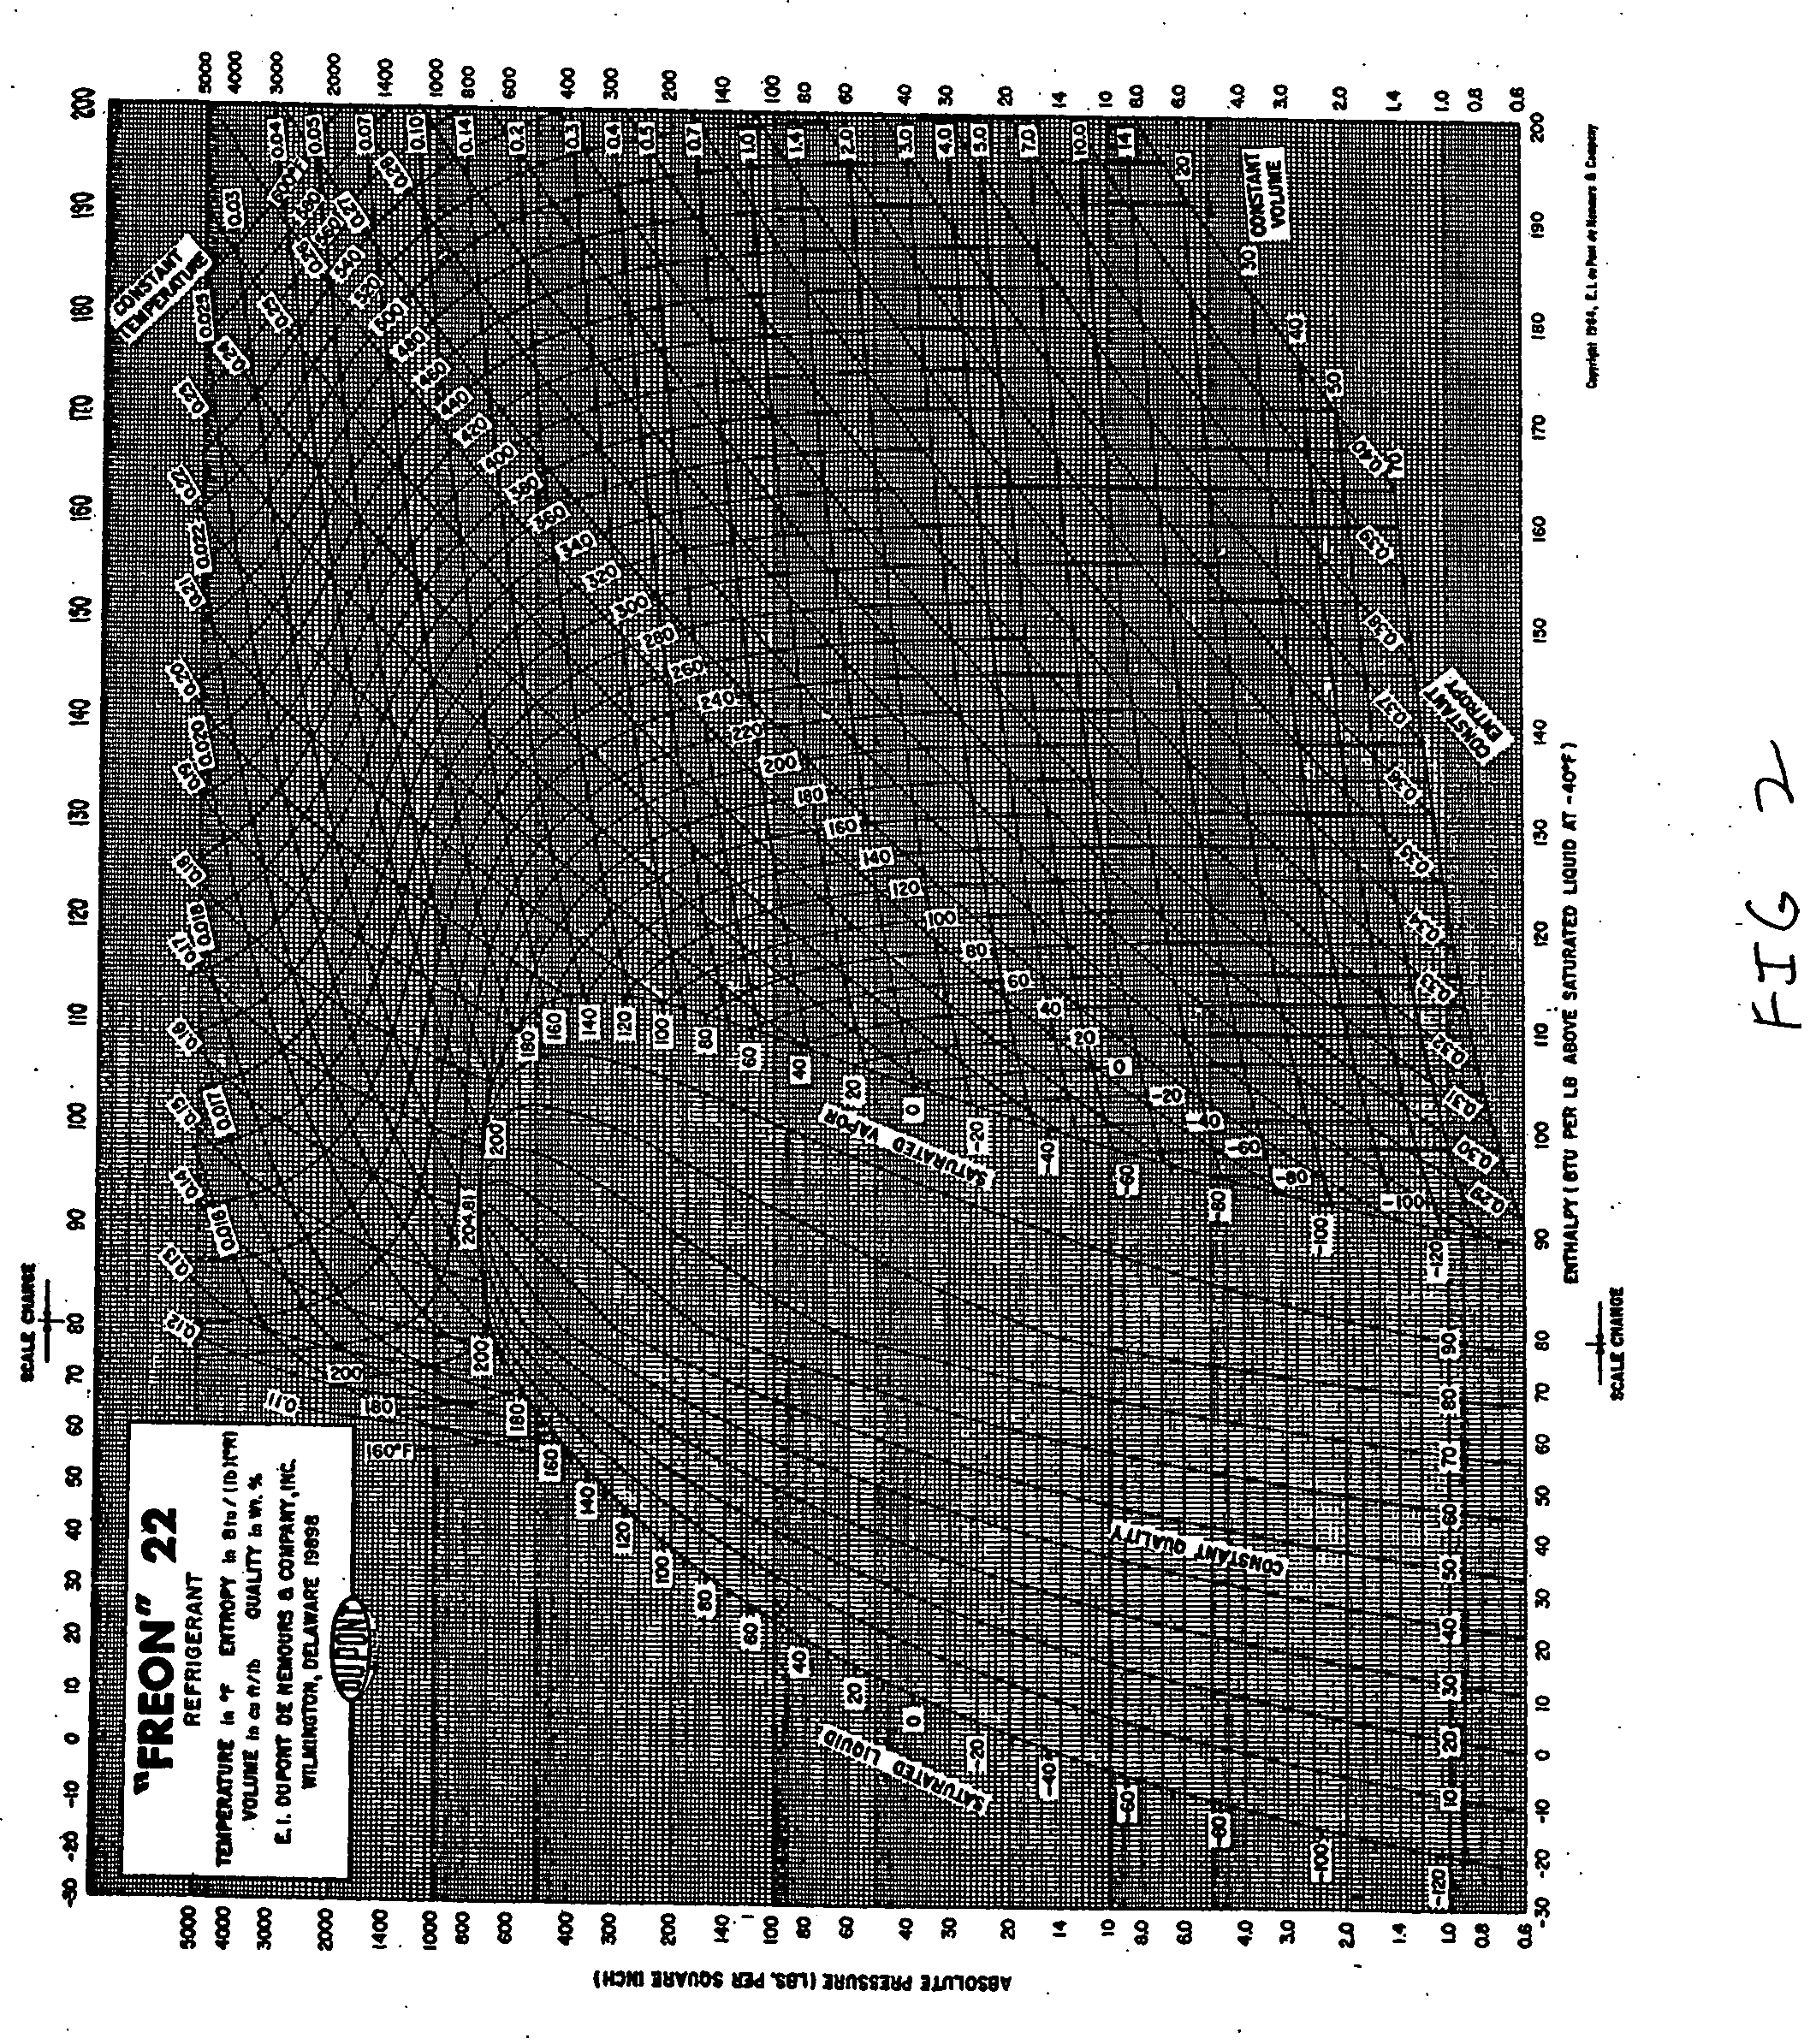 Method and apparatus for monitoring refrigerant-cycle systems